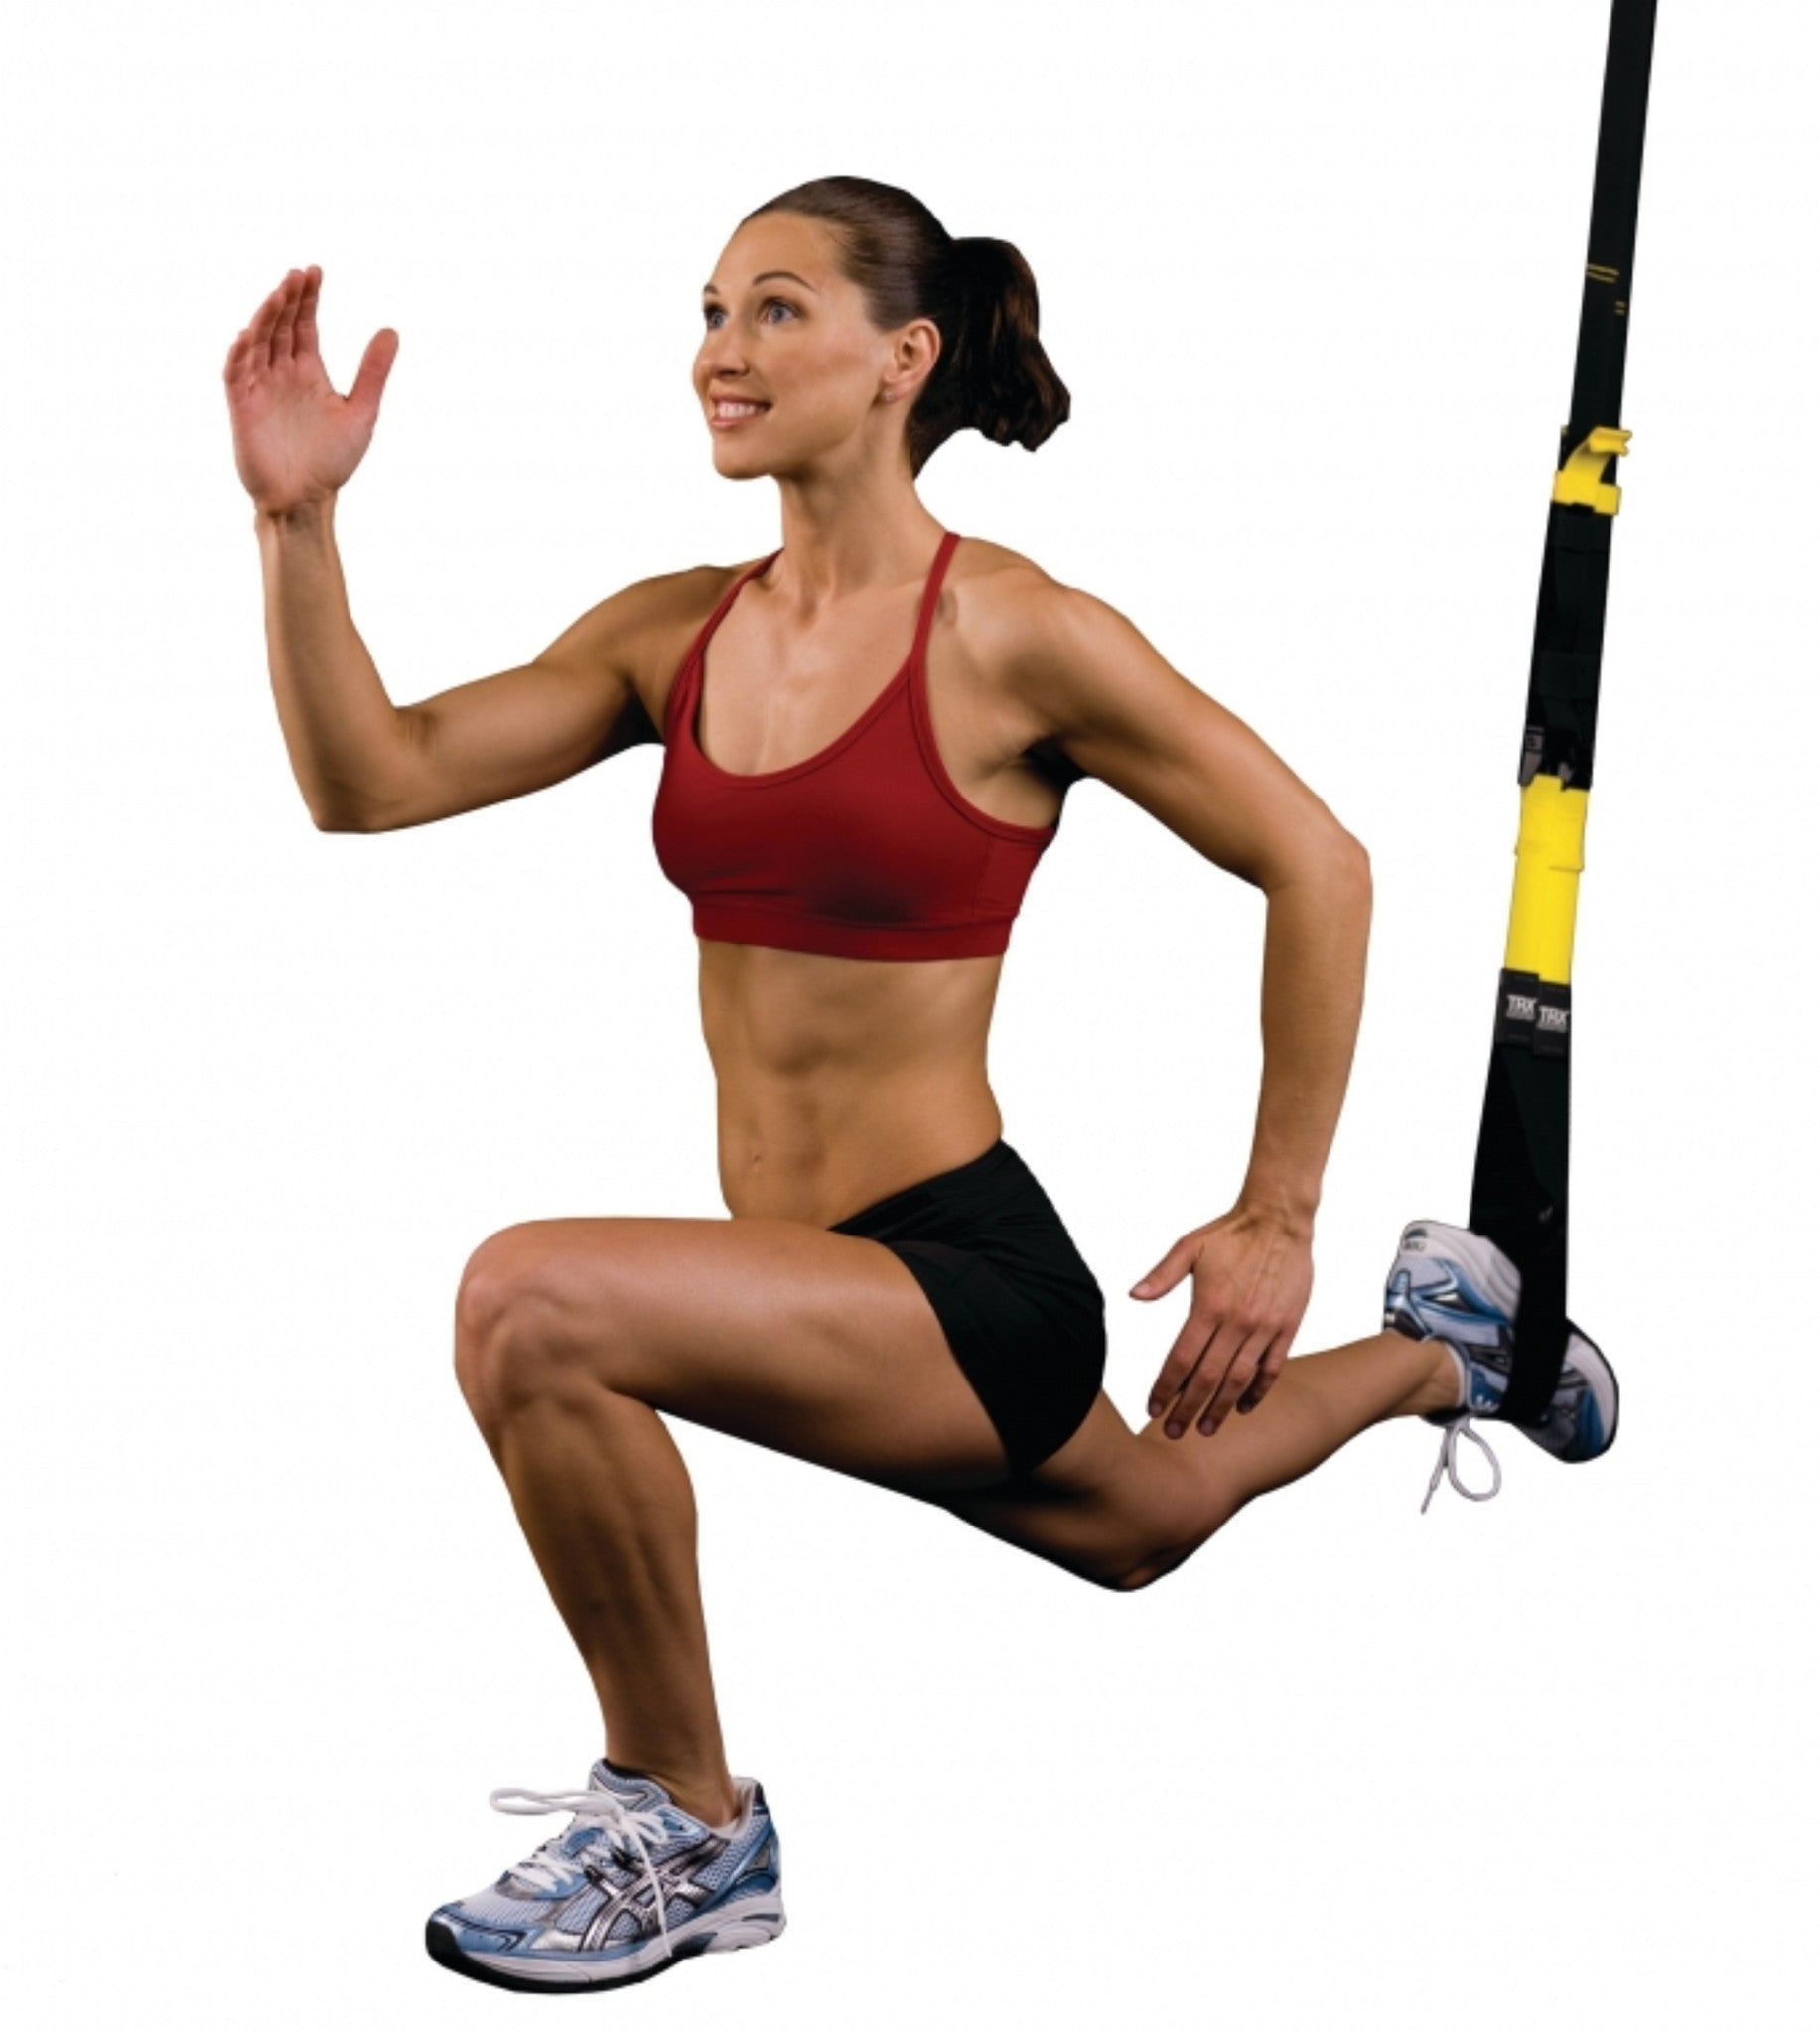 TRX® Suspension Training® Course (Level 1) - Nimble Fitness: New York City  Personal Trainer